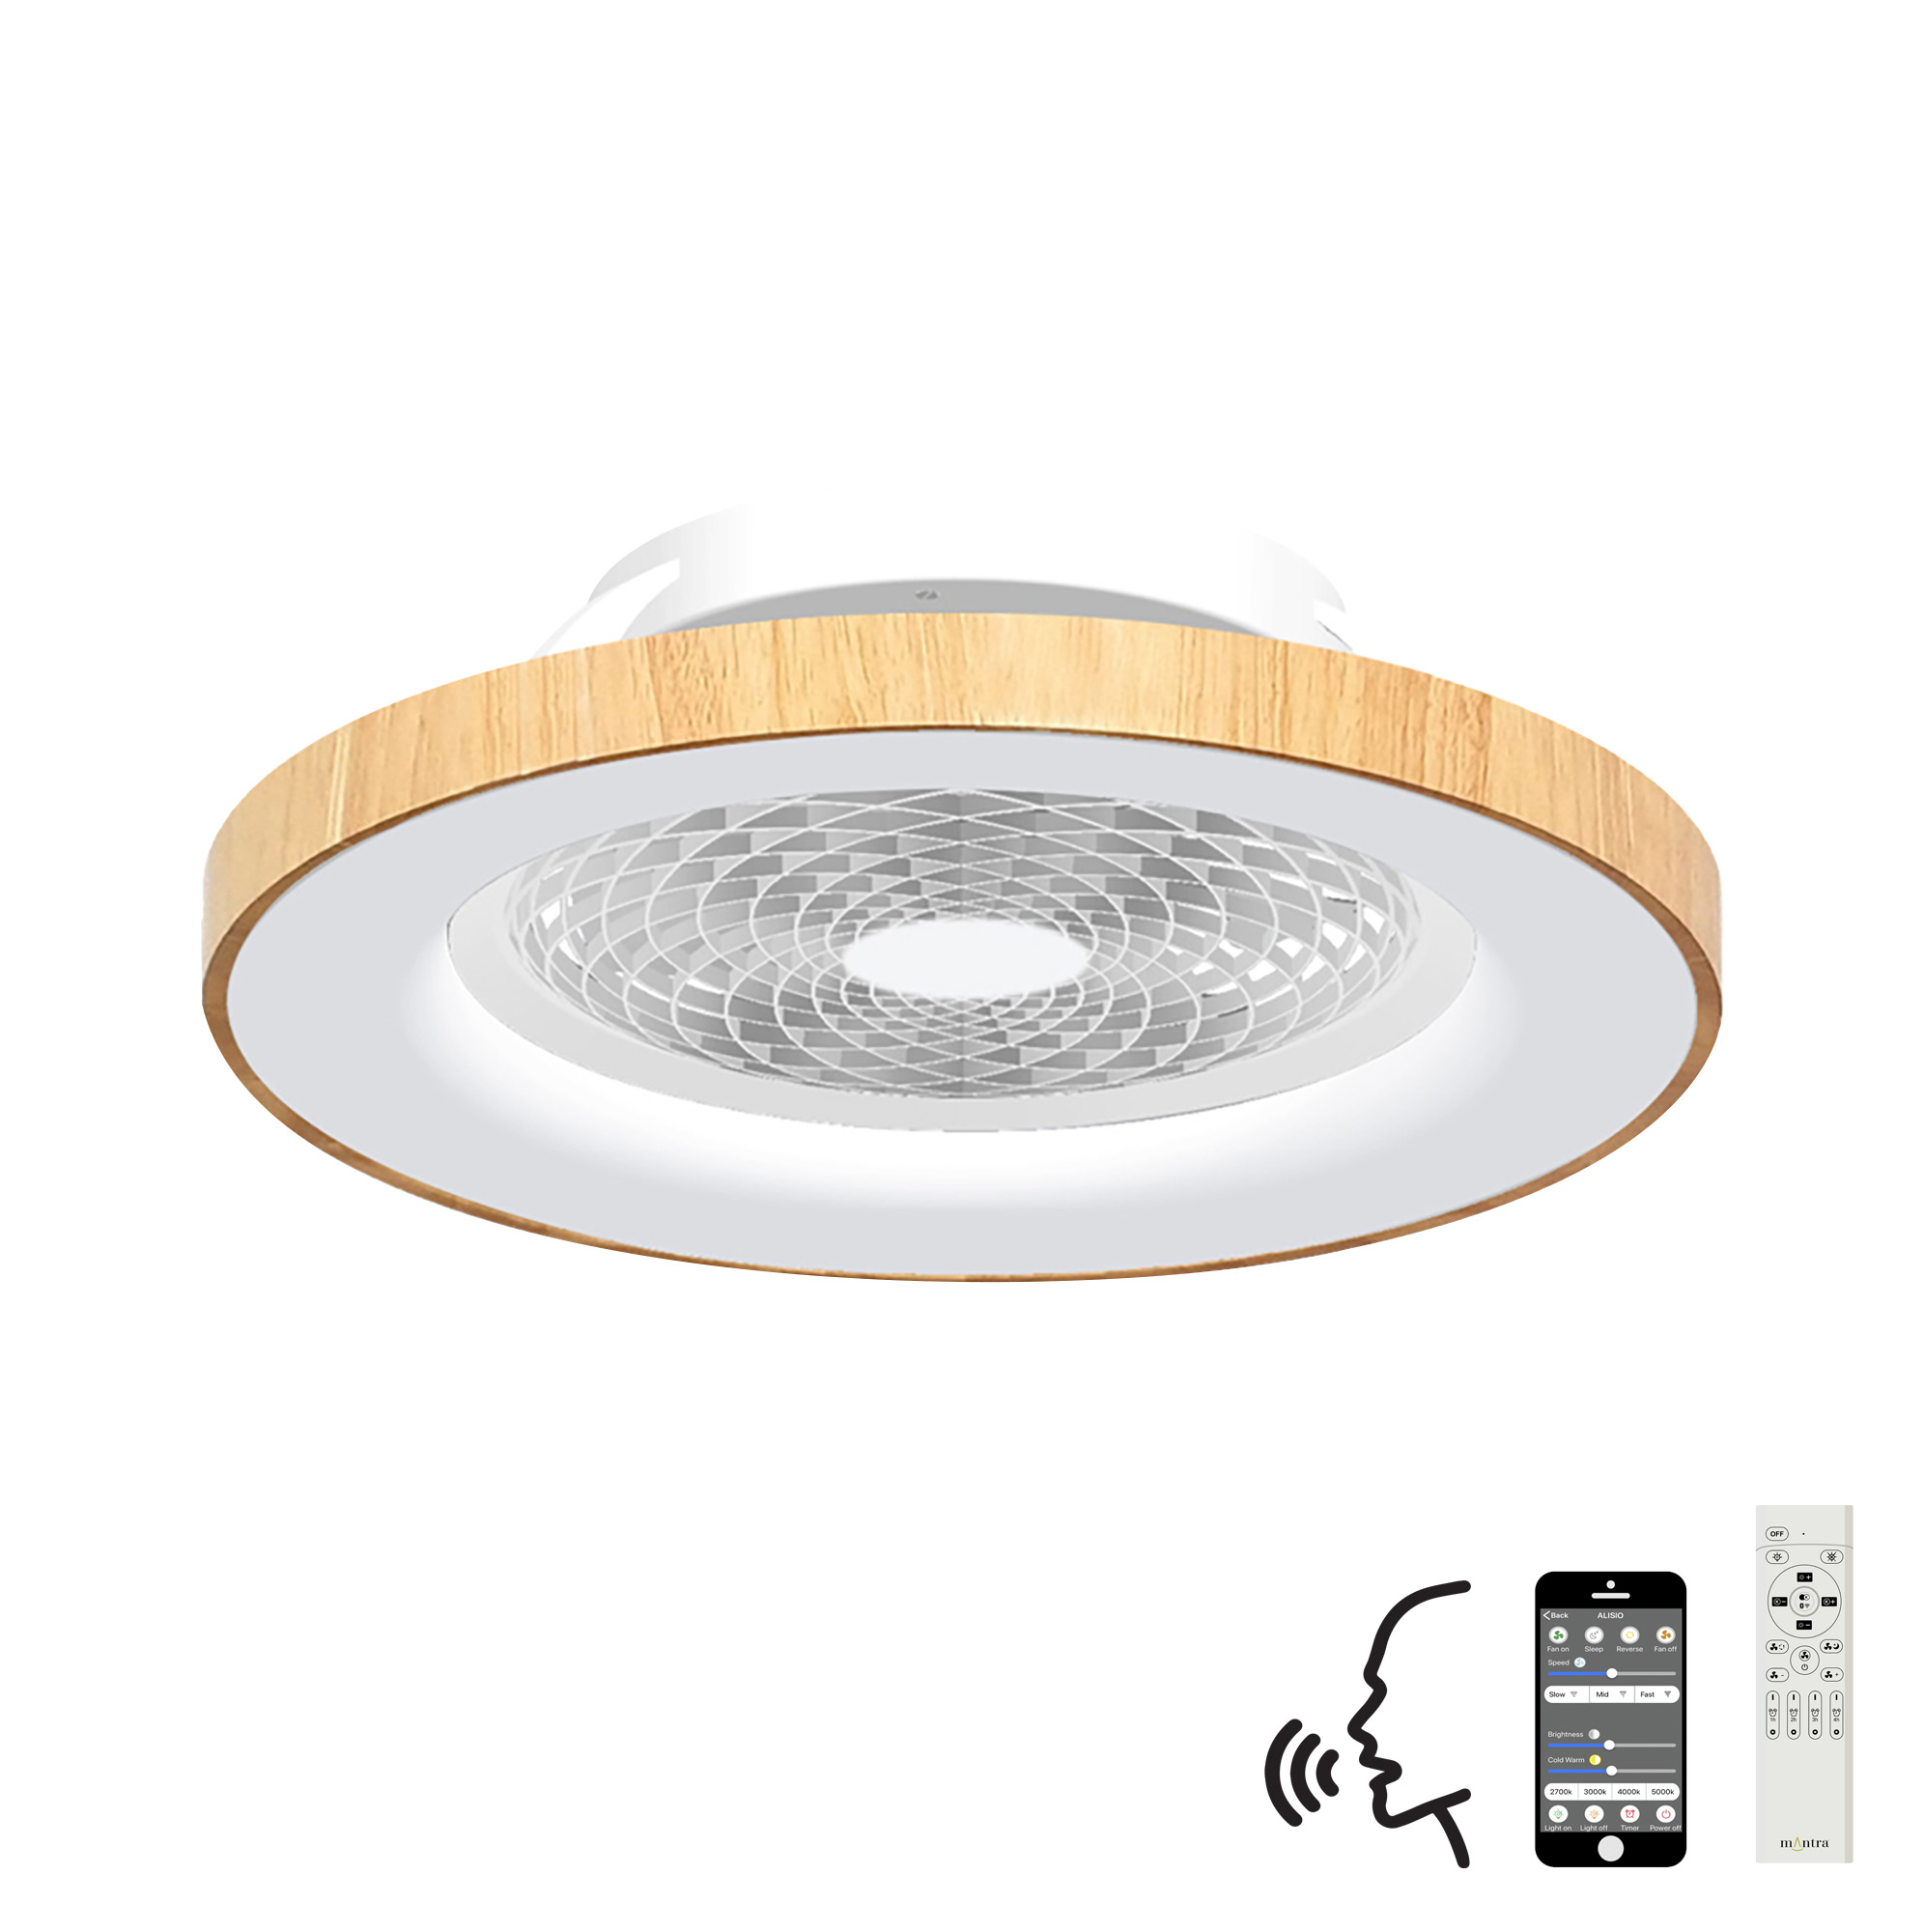 M7126  Tibet 70W LED Dimmable Ceiling Light & Fan, Remote / APP / Voice Controlled Wood Effect